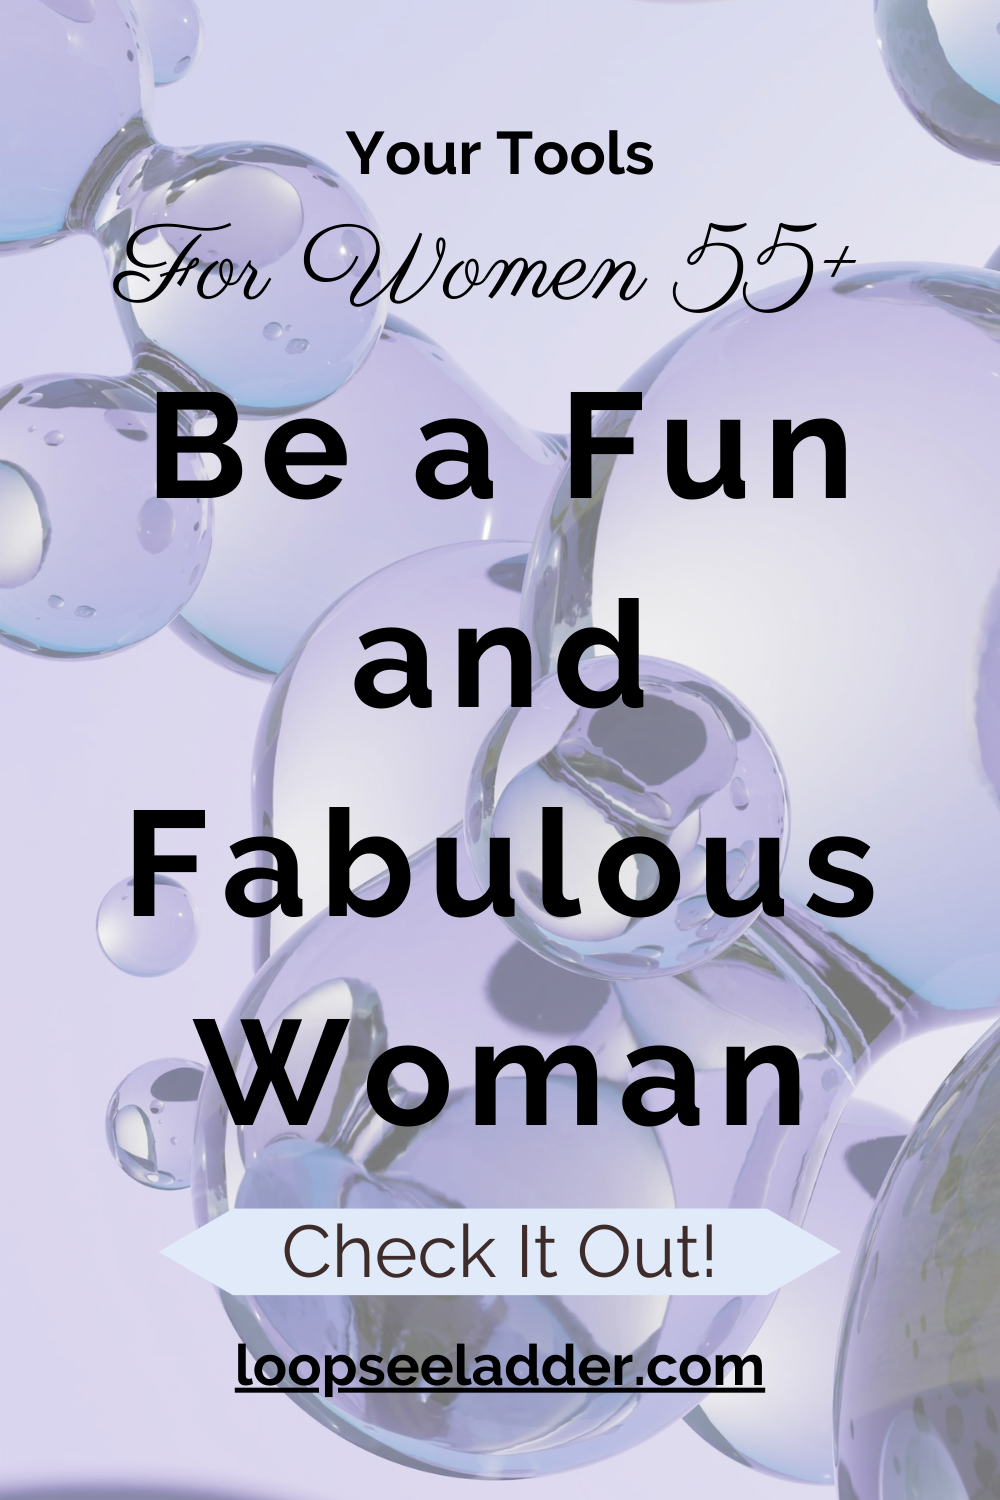 The Secret Sauce to Being a Fun and Fabulous Woman 55+